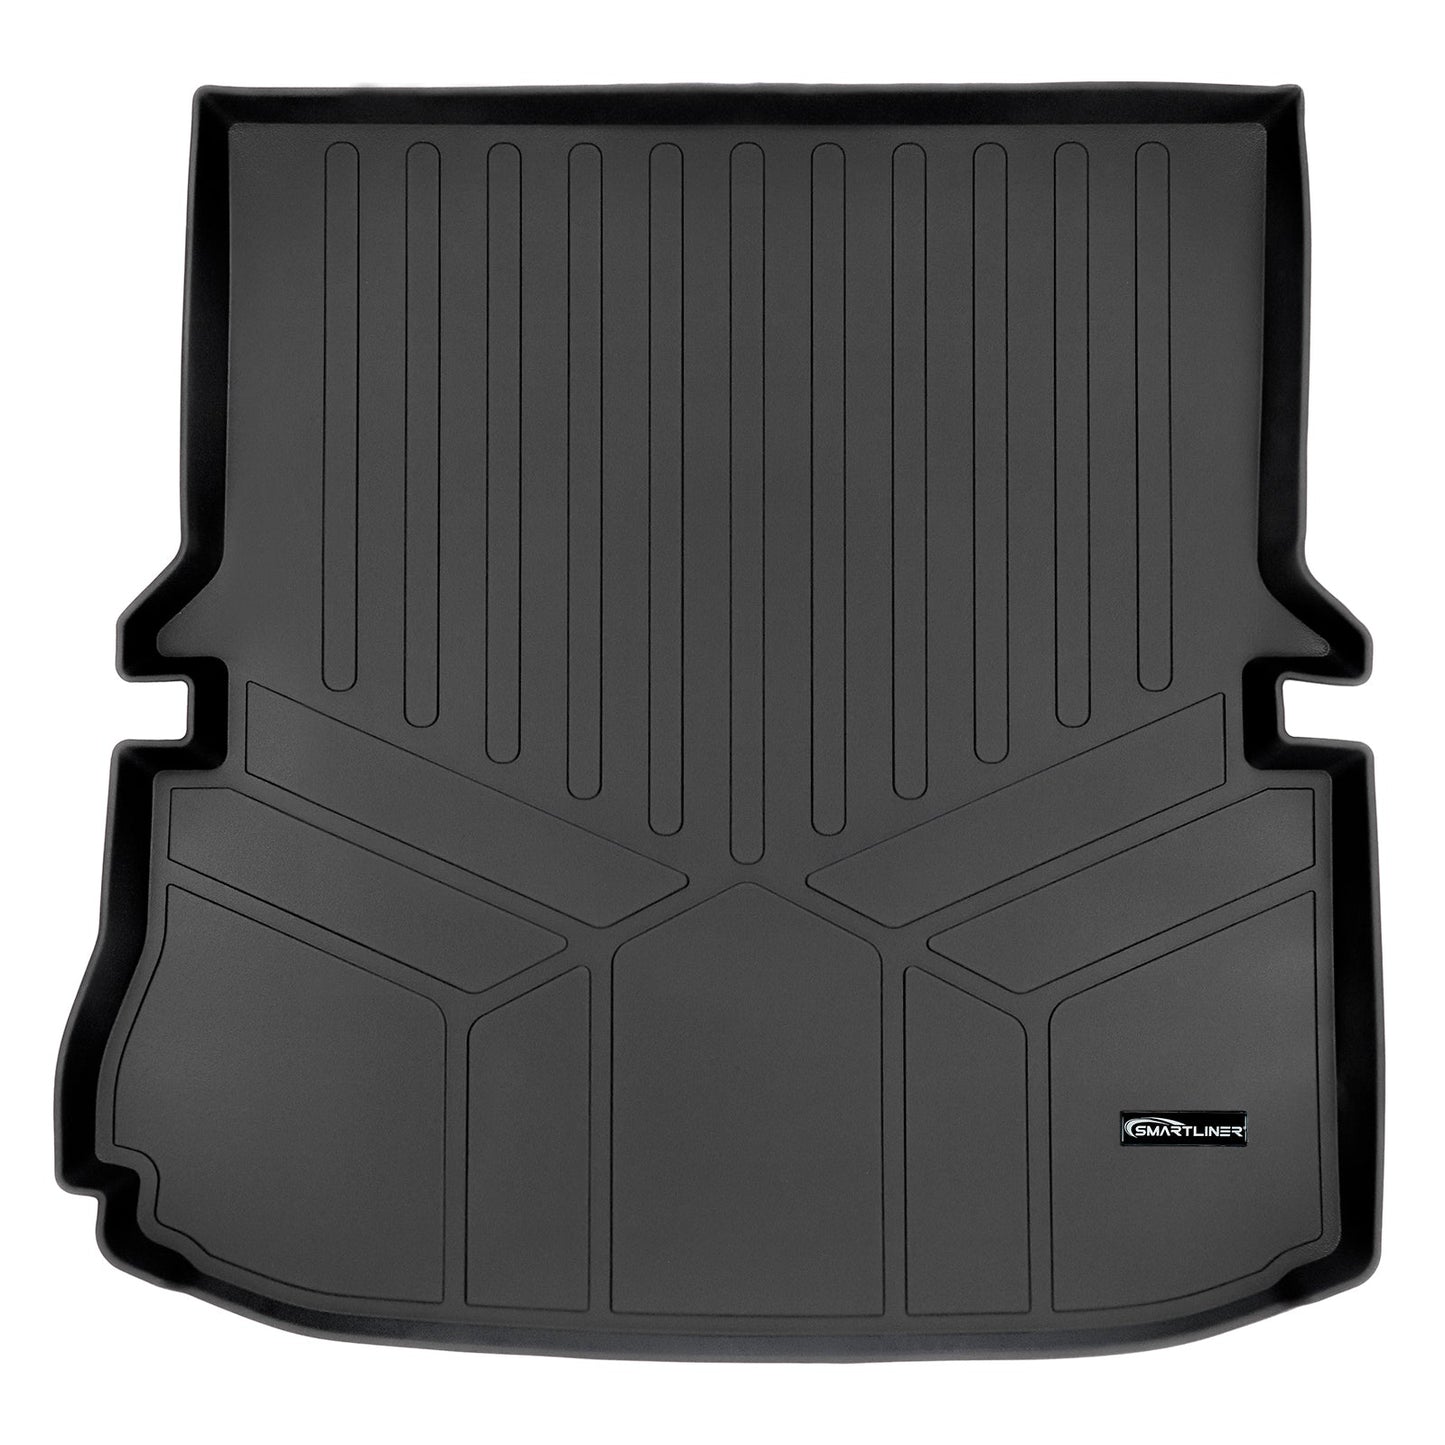 SMARTLINER Cargo Liner Behind the 2nd Row for 2011-2014 Ford Explorer (With 2nd Row Center Console)